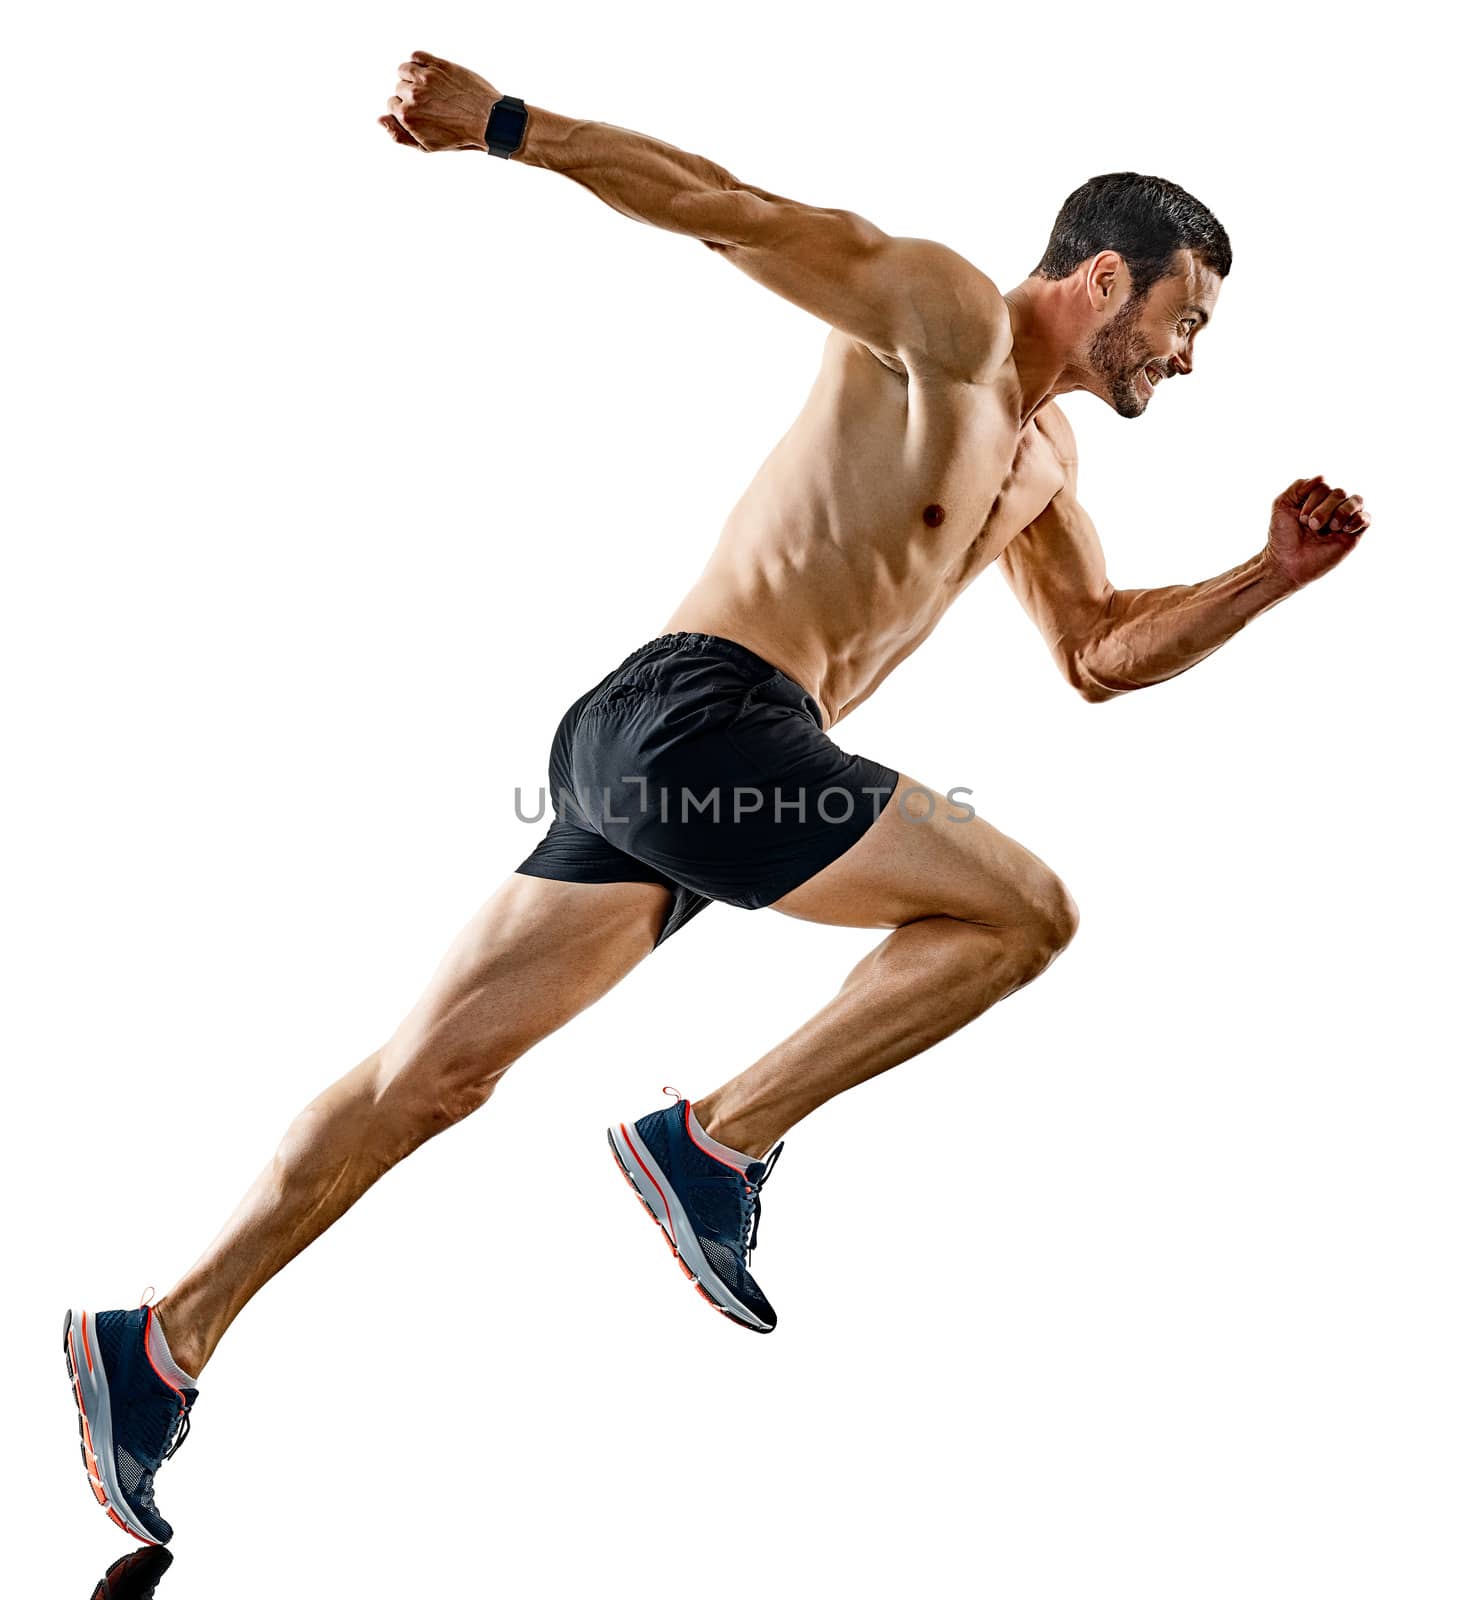 one caucasian man runner jogger running jogging isolated on white background with shadows